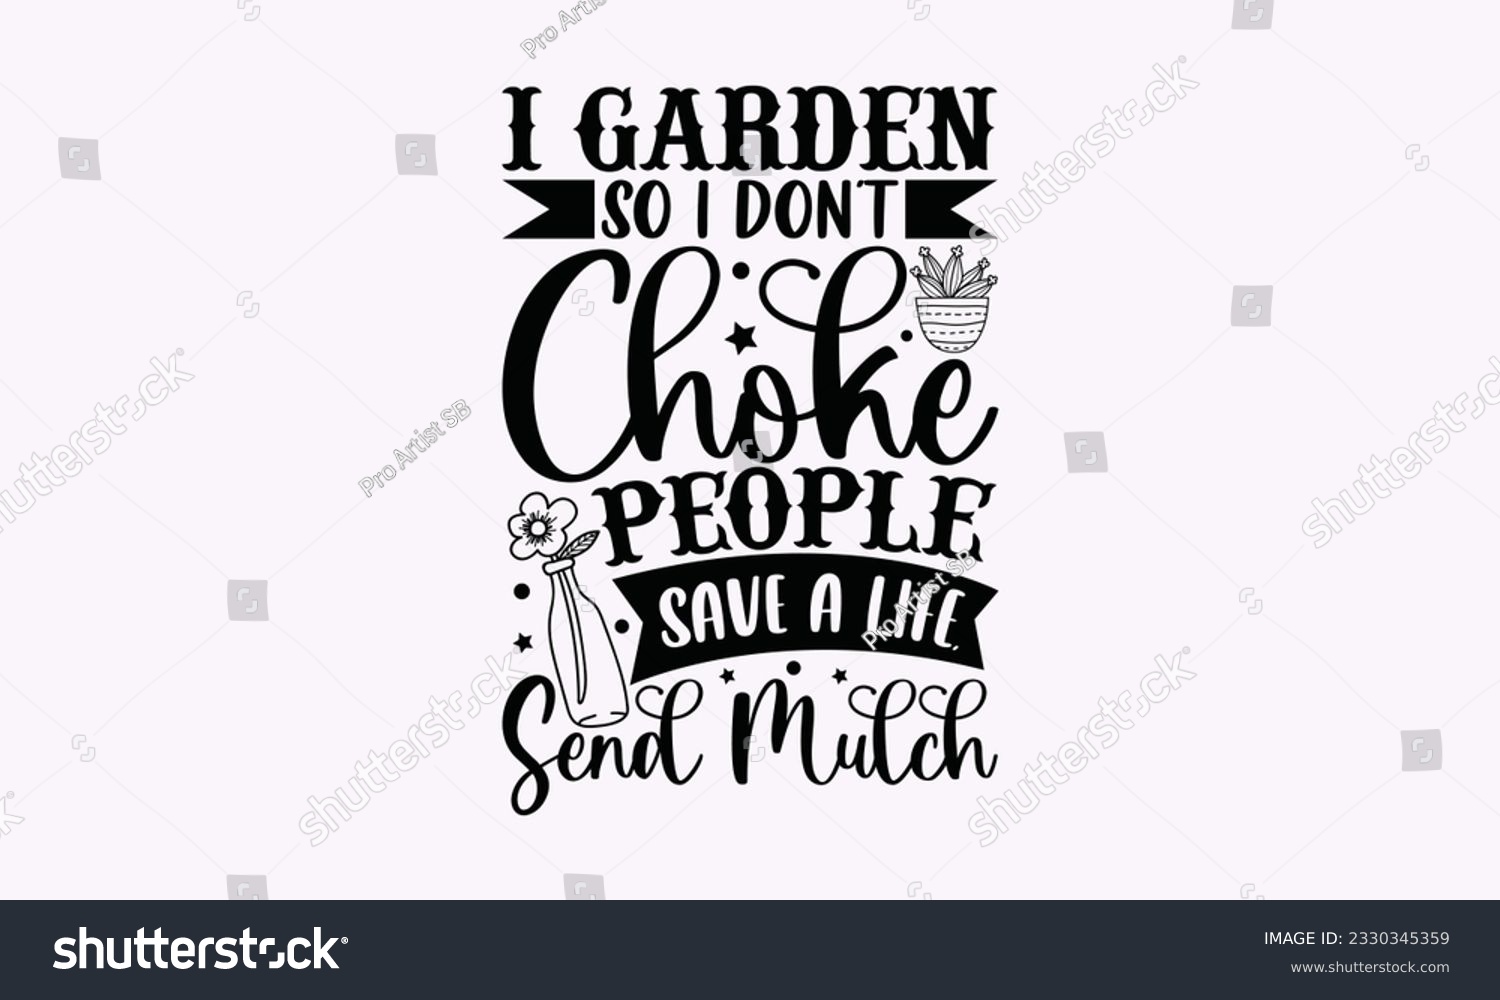 SVG of I garden so I don’t choke people save a life, send mulch - Gardening SVG Design, Flower Quotes, Calligraphy graphic design, Typography poster with old style camera and quote. svg